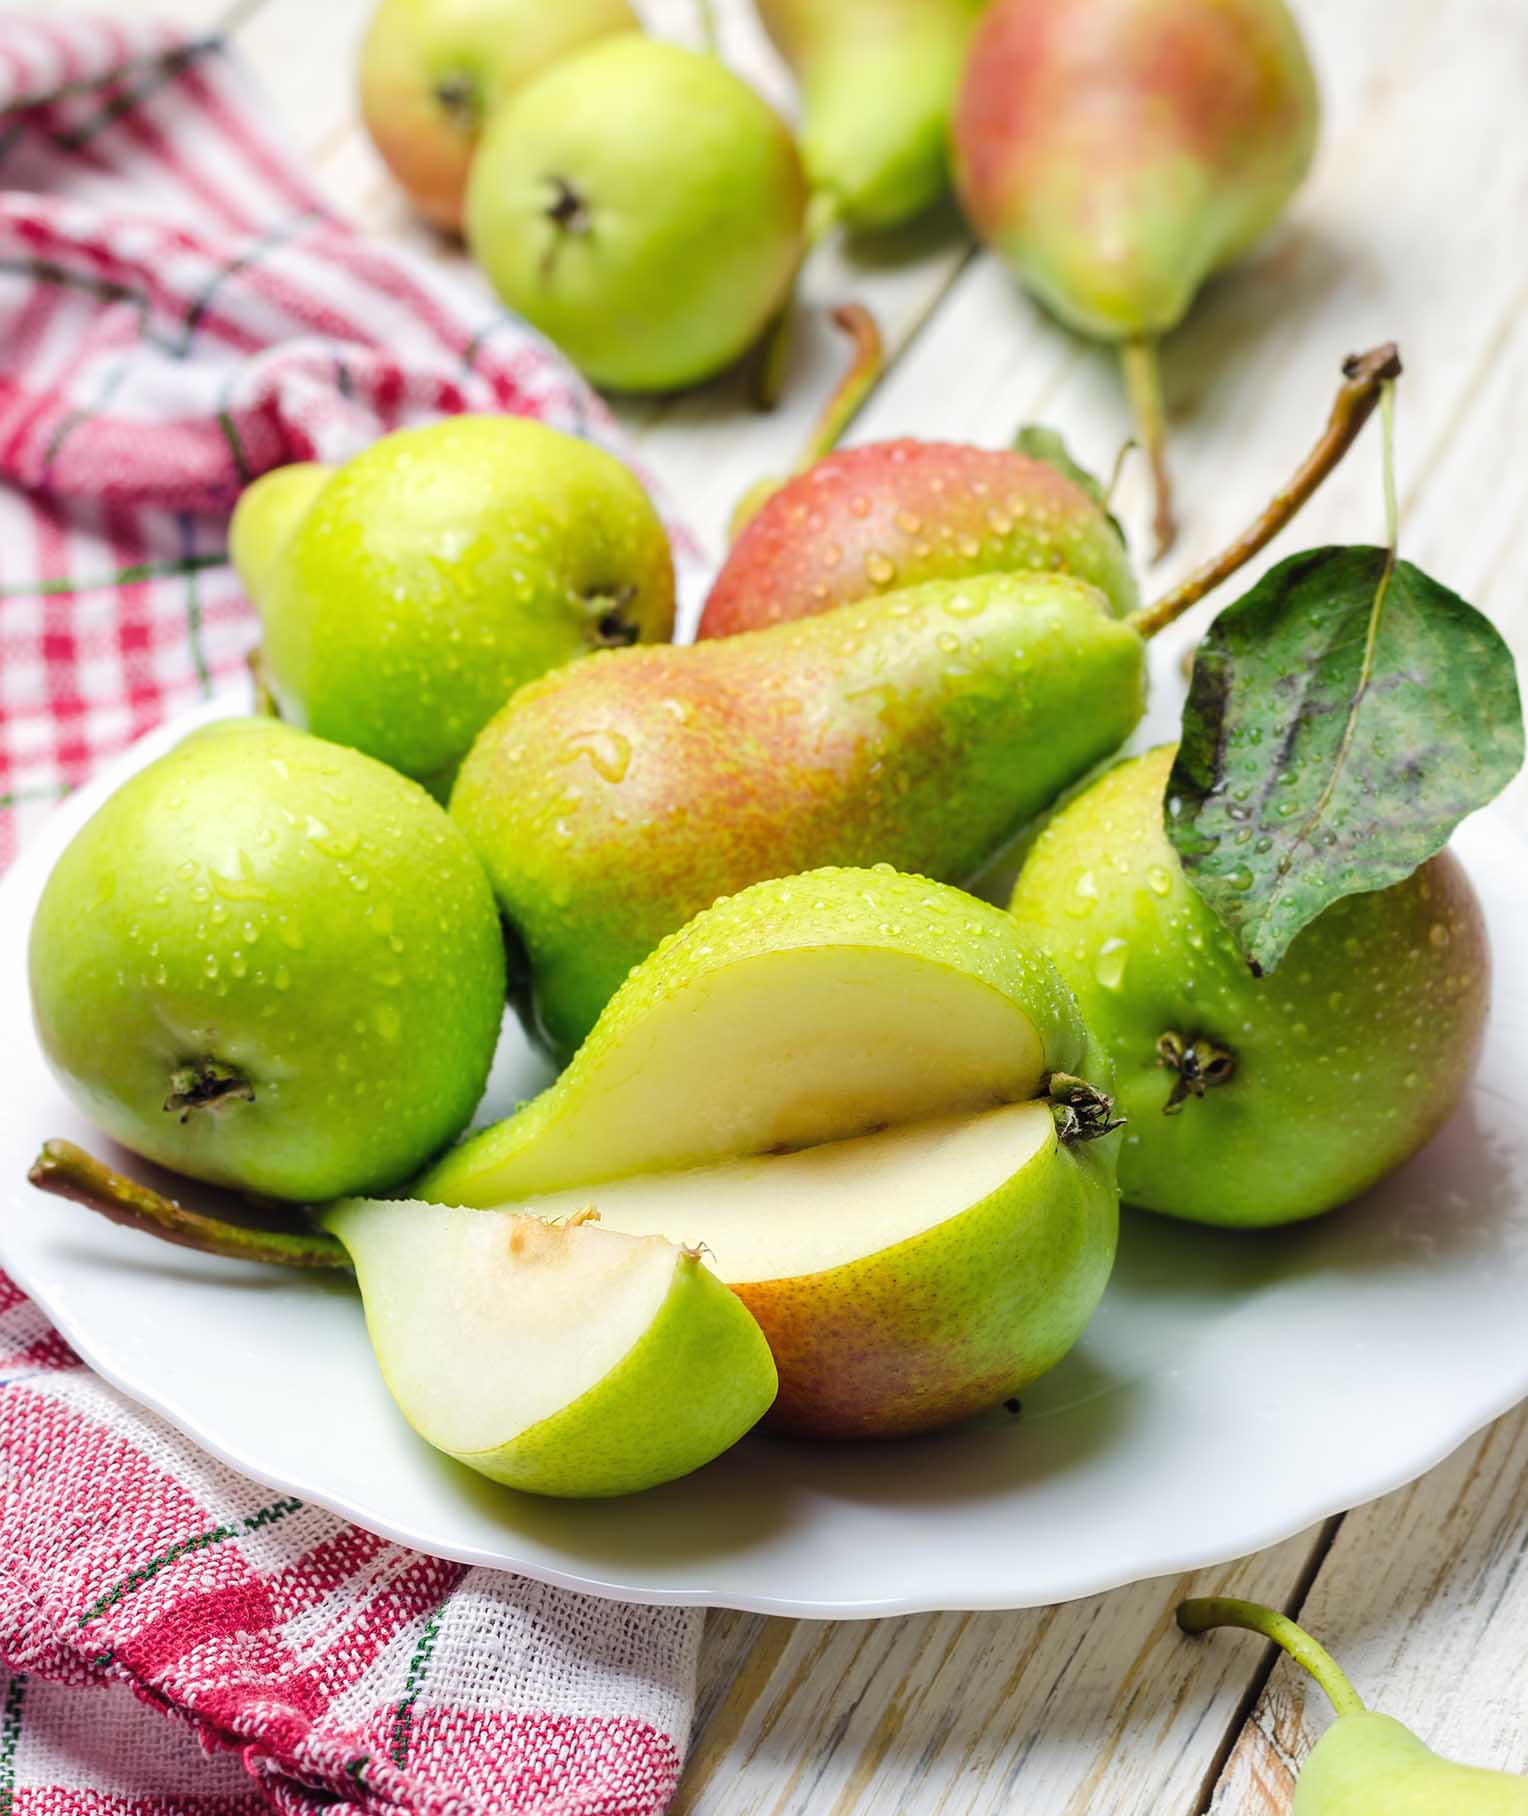 Pears Vs. Apples: Nutritional Comparison And Health Benefits